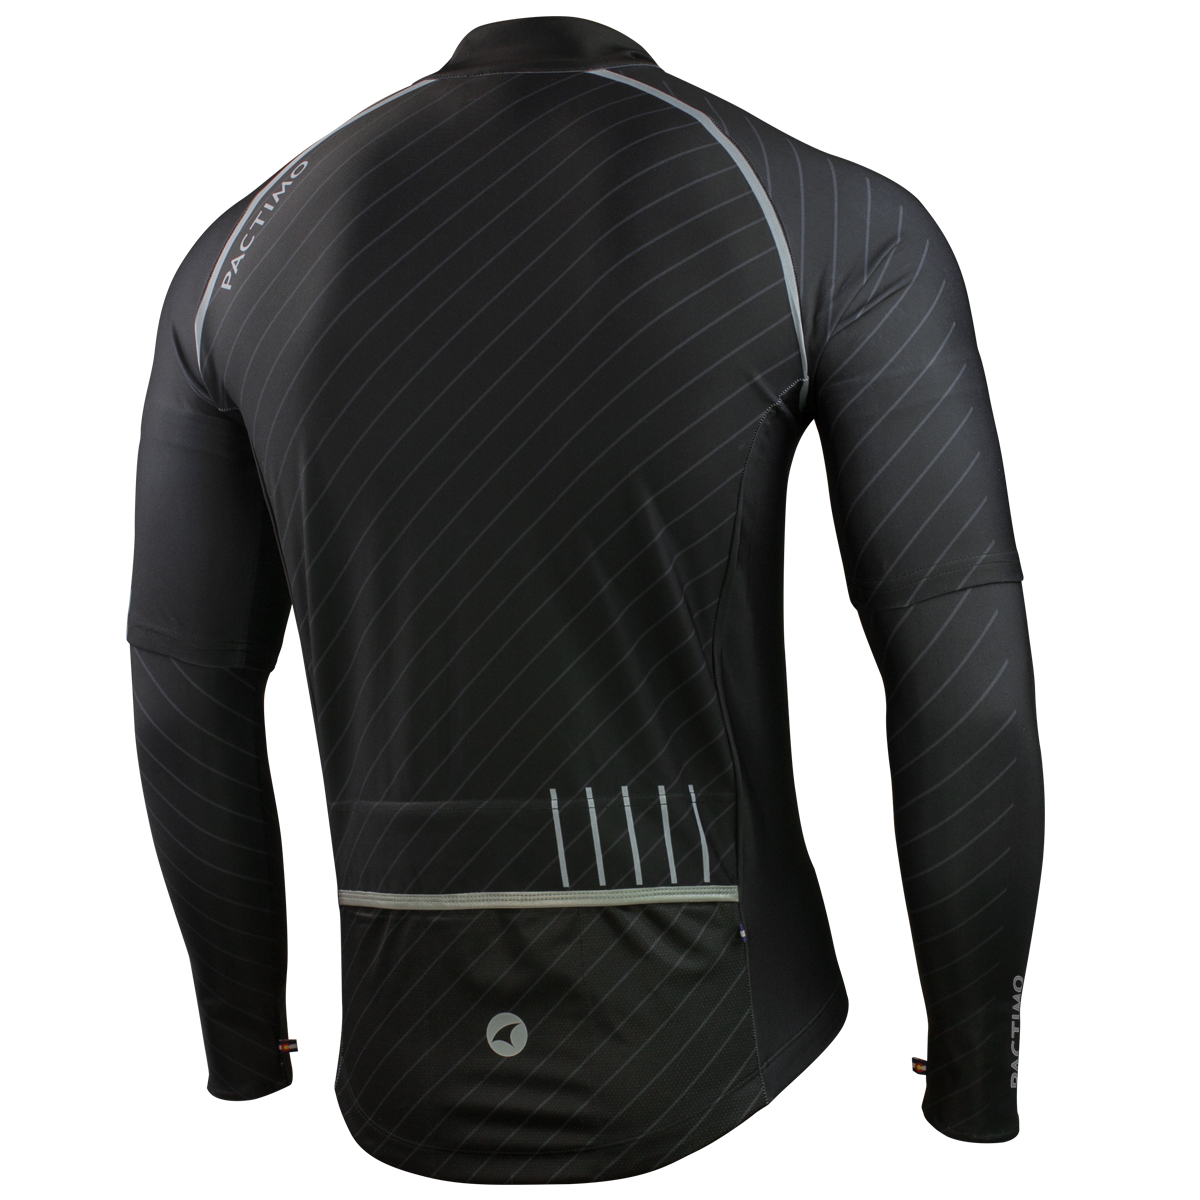 Hands on with Pactimo's Stylish and Functional 2015 Spring Branded ...